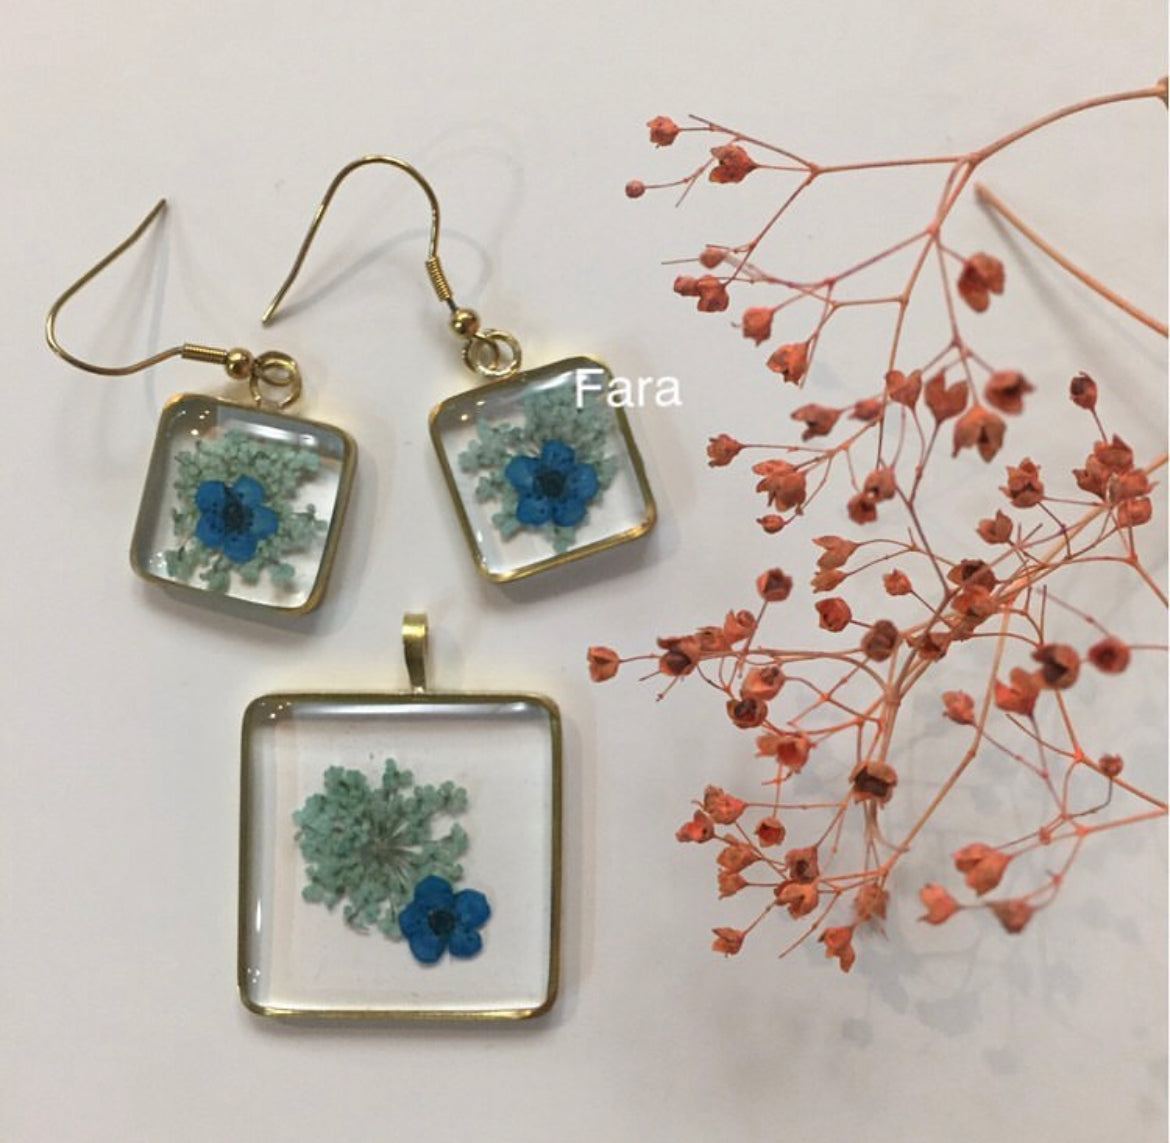 Soft Green Fynbos Blast and tiny blue Square Shape Resin Jewellery